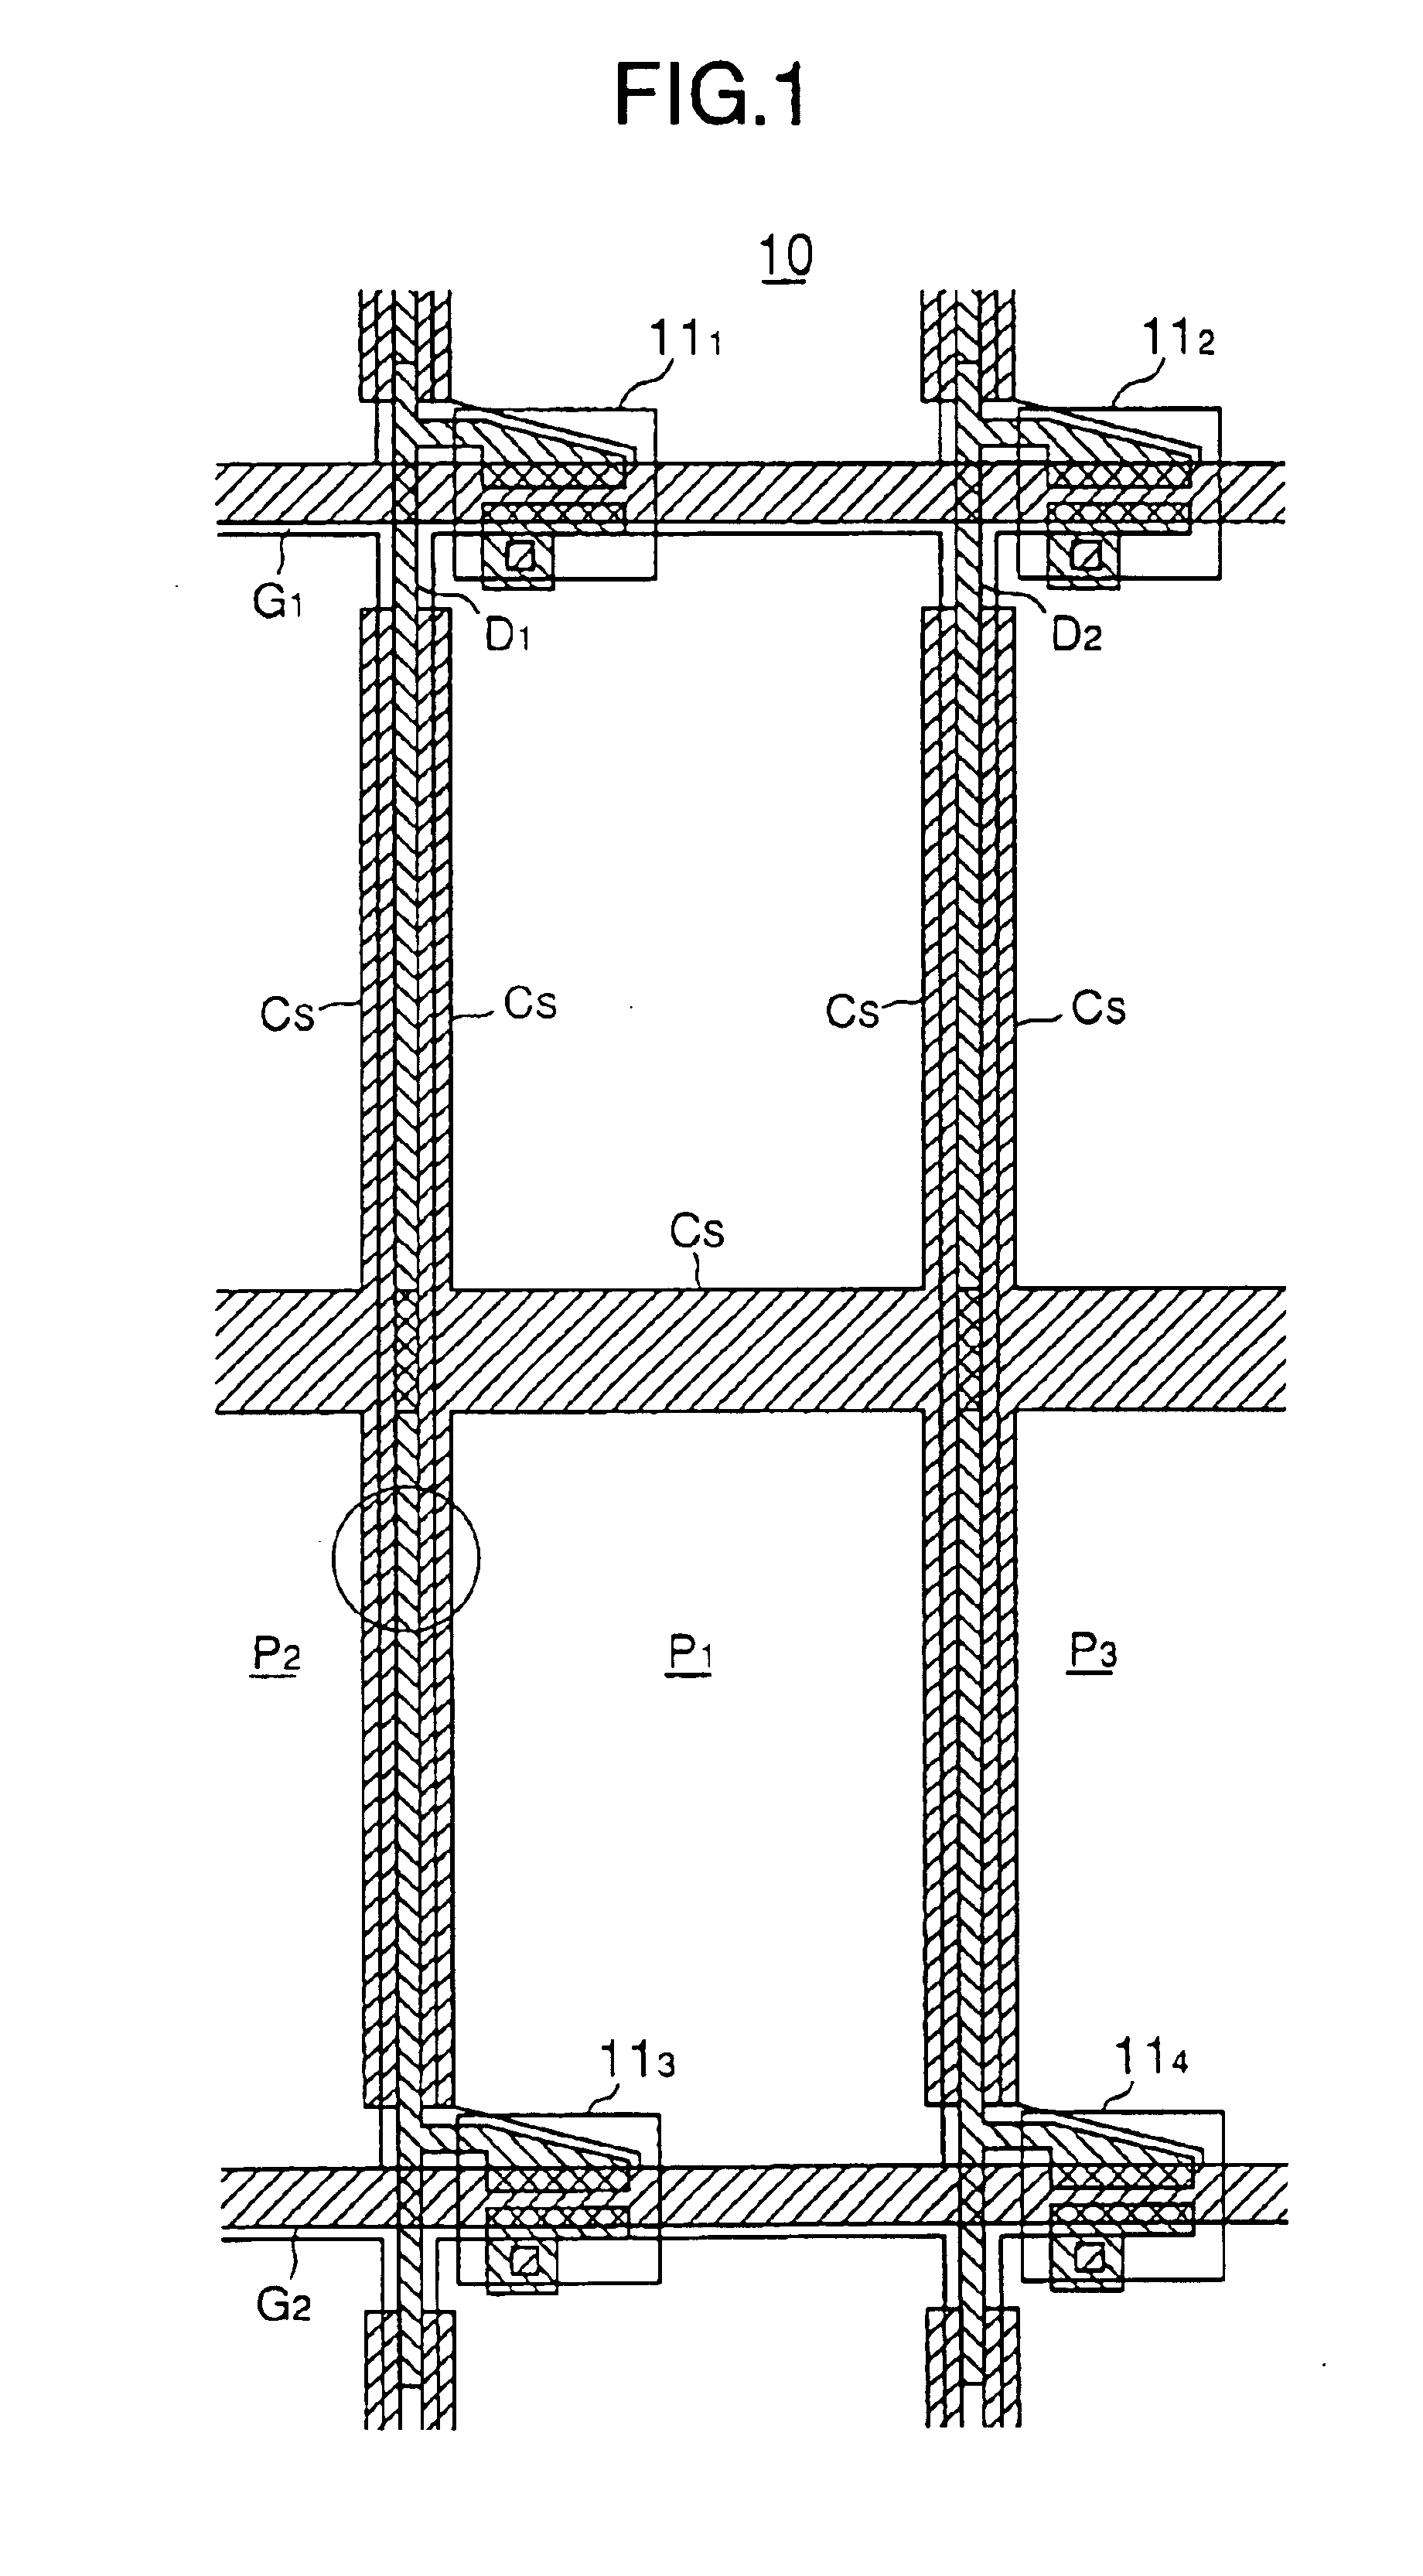 Driving of a liquid crystal display device